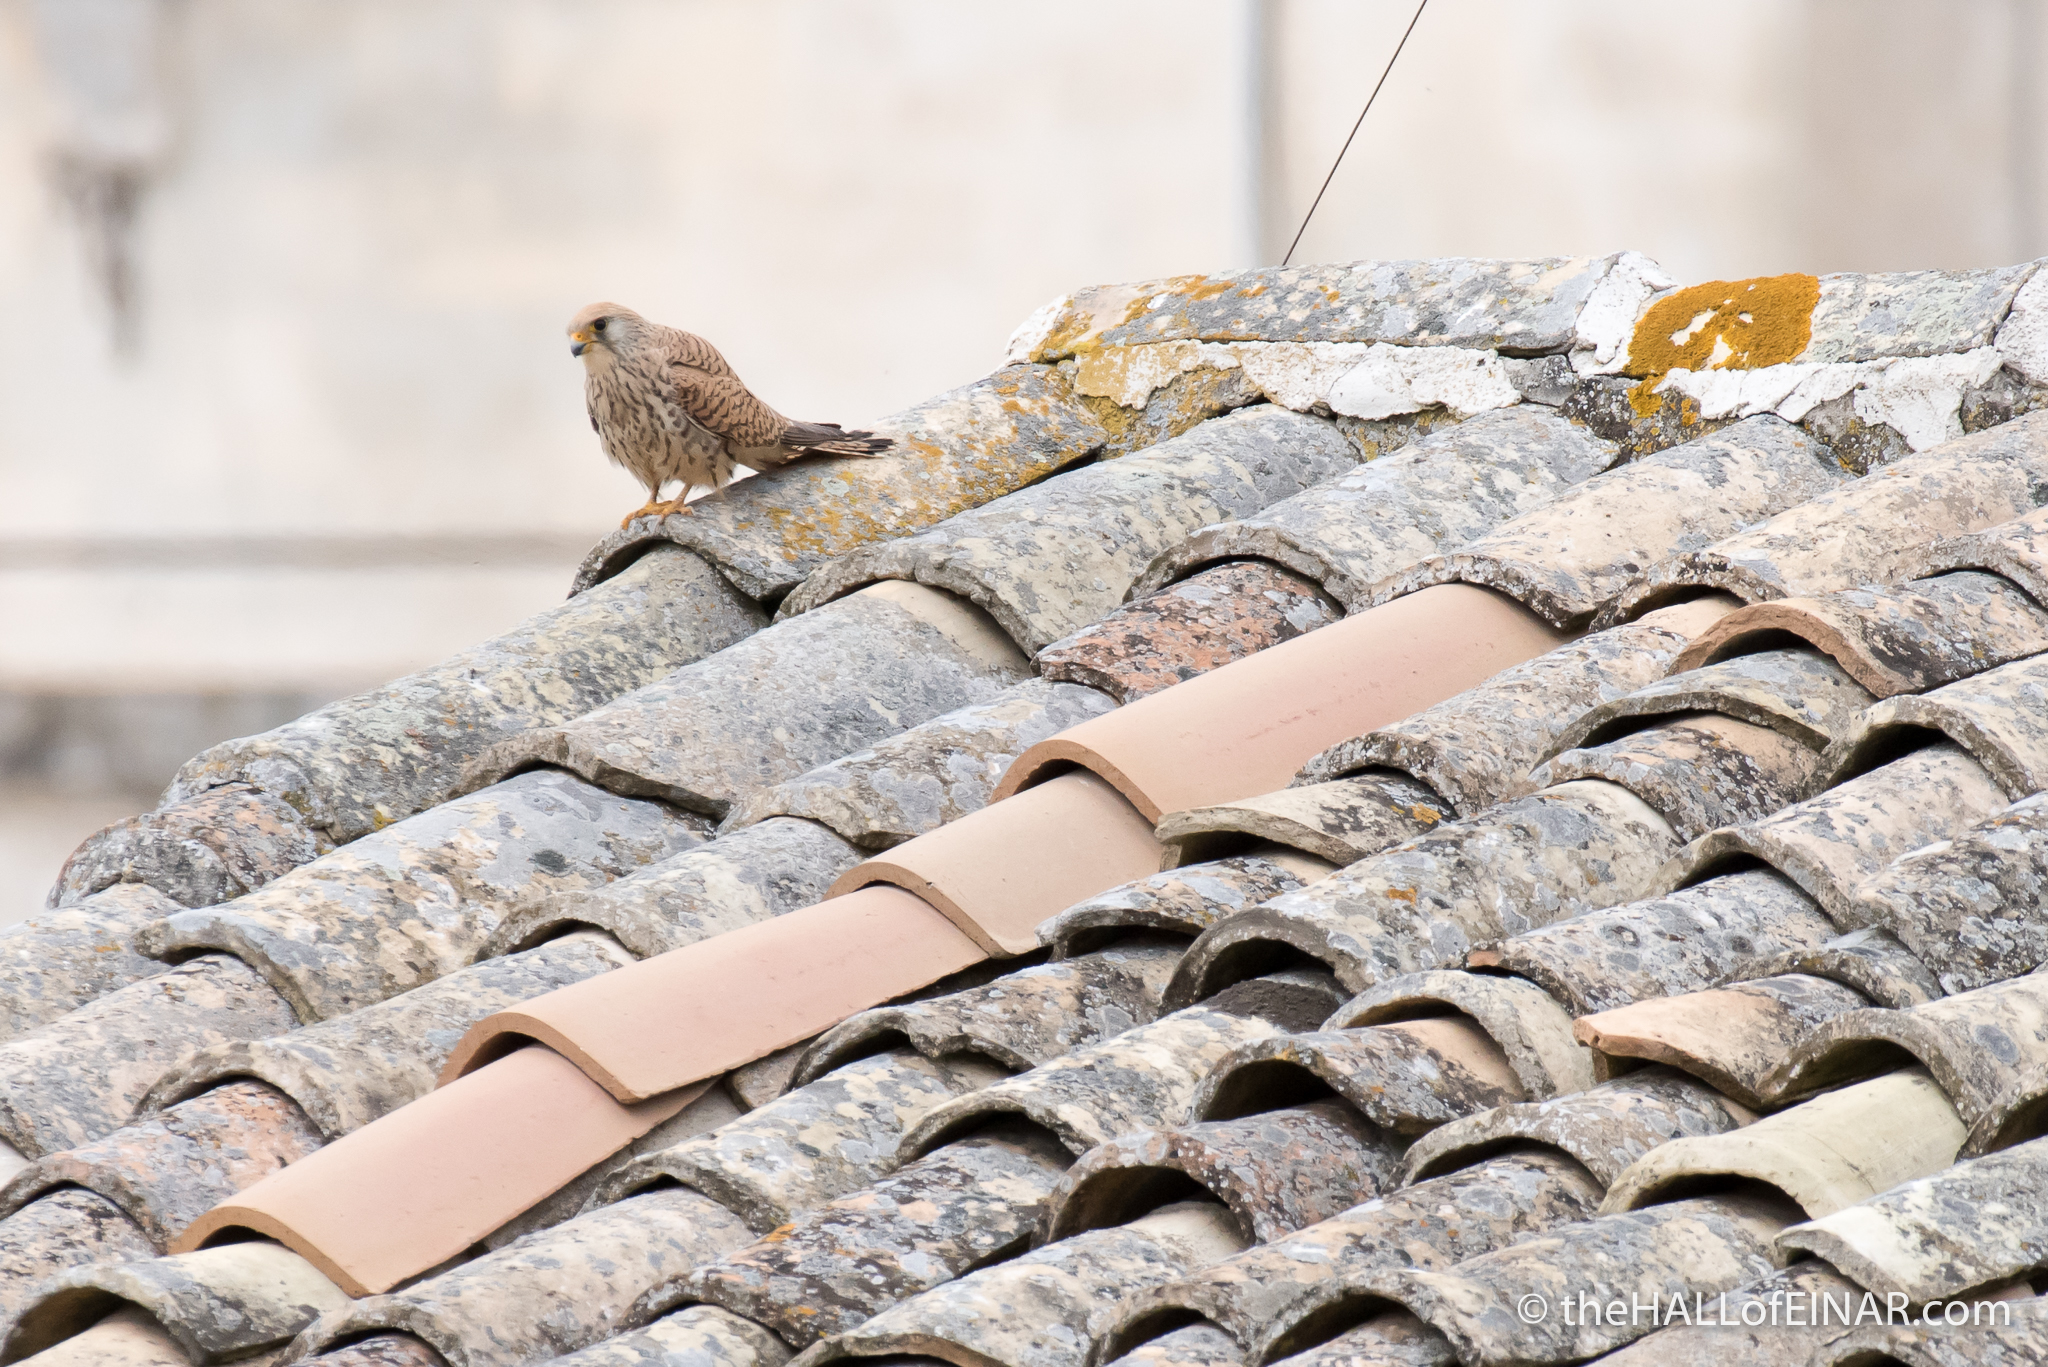 Lesser Kestral in Matera - The Hall of Einar - photograph (c) David Bailey (not the)